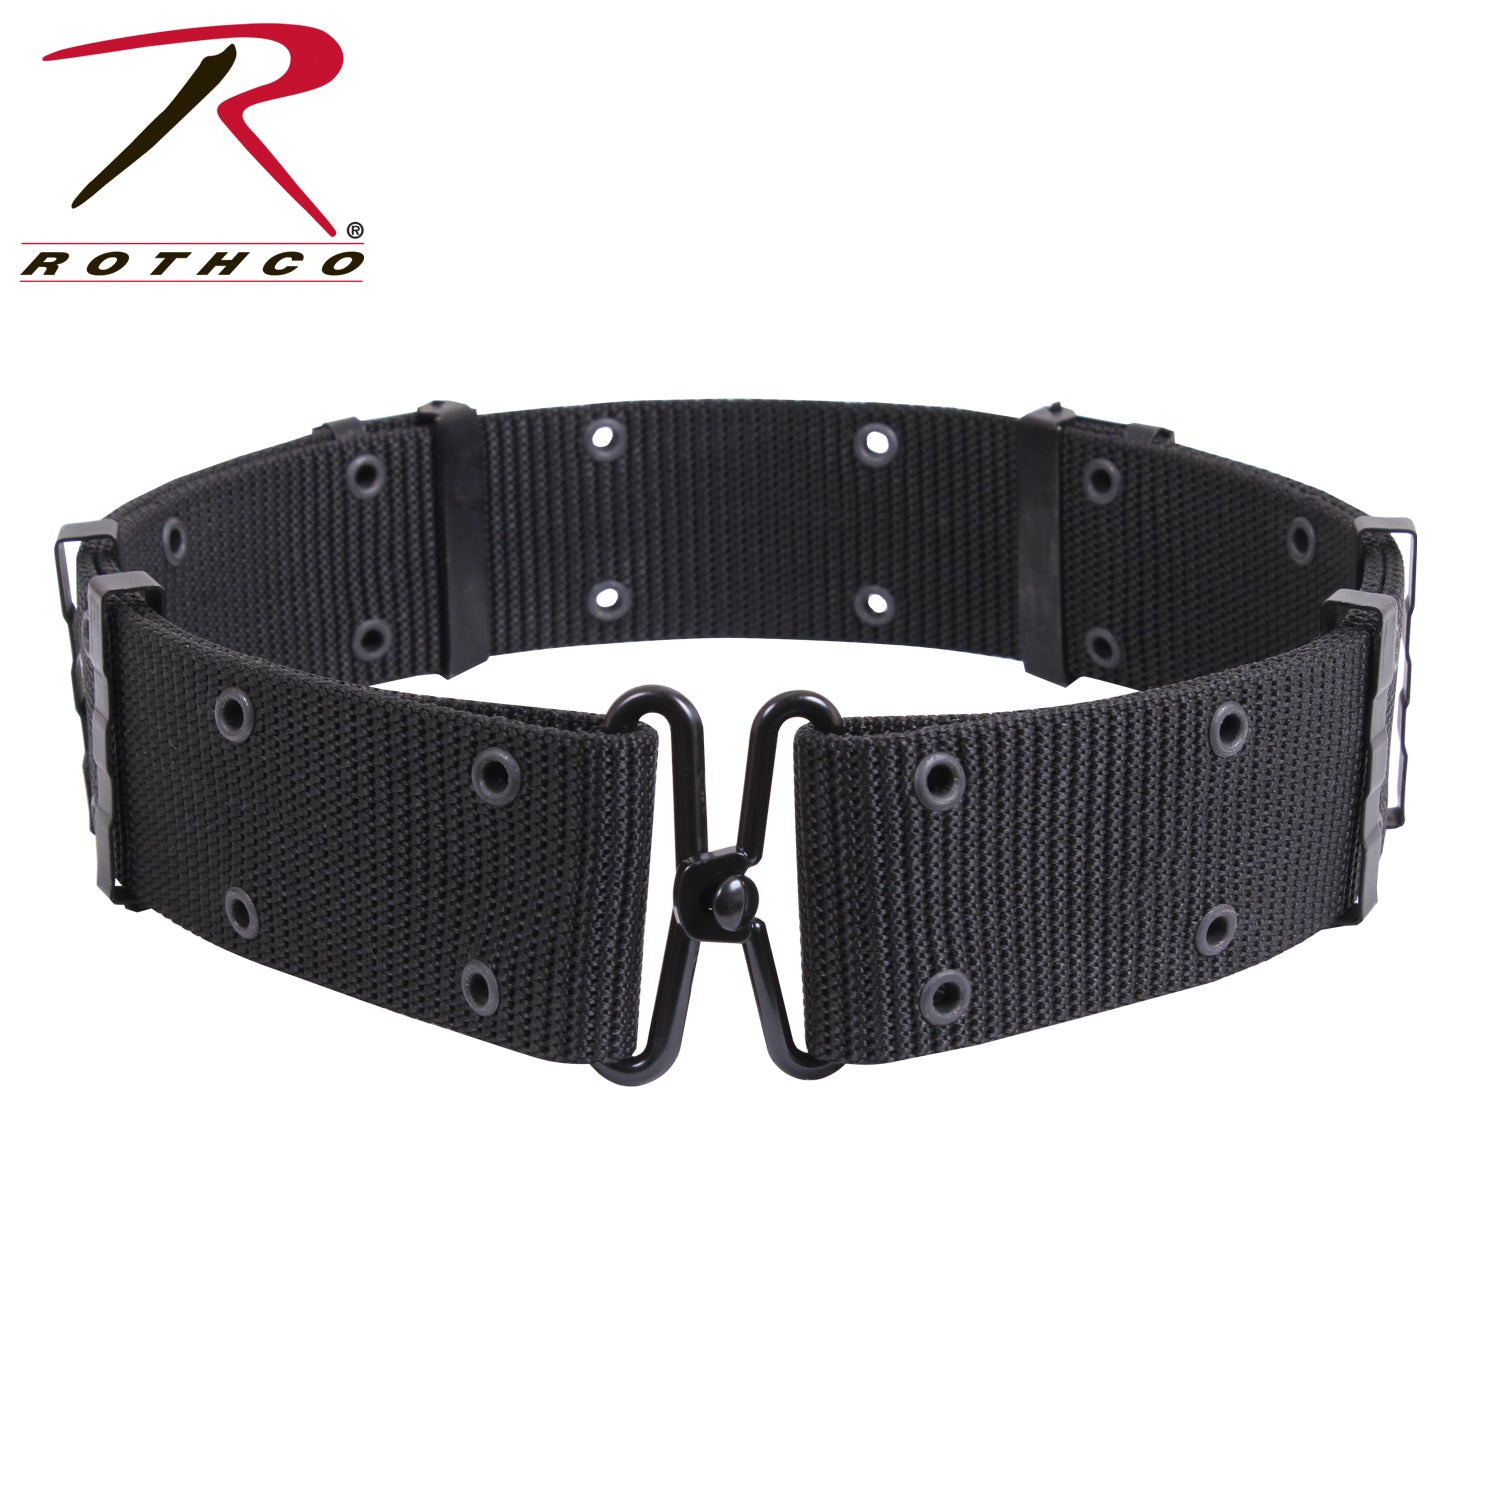 Rothco GI Style Pistol Belt With Metal Buckles - Tactical Choice Plus